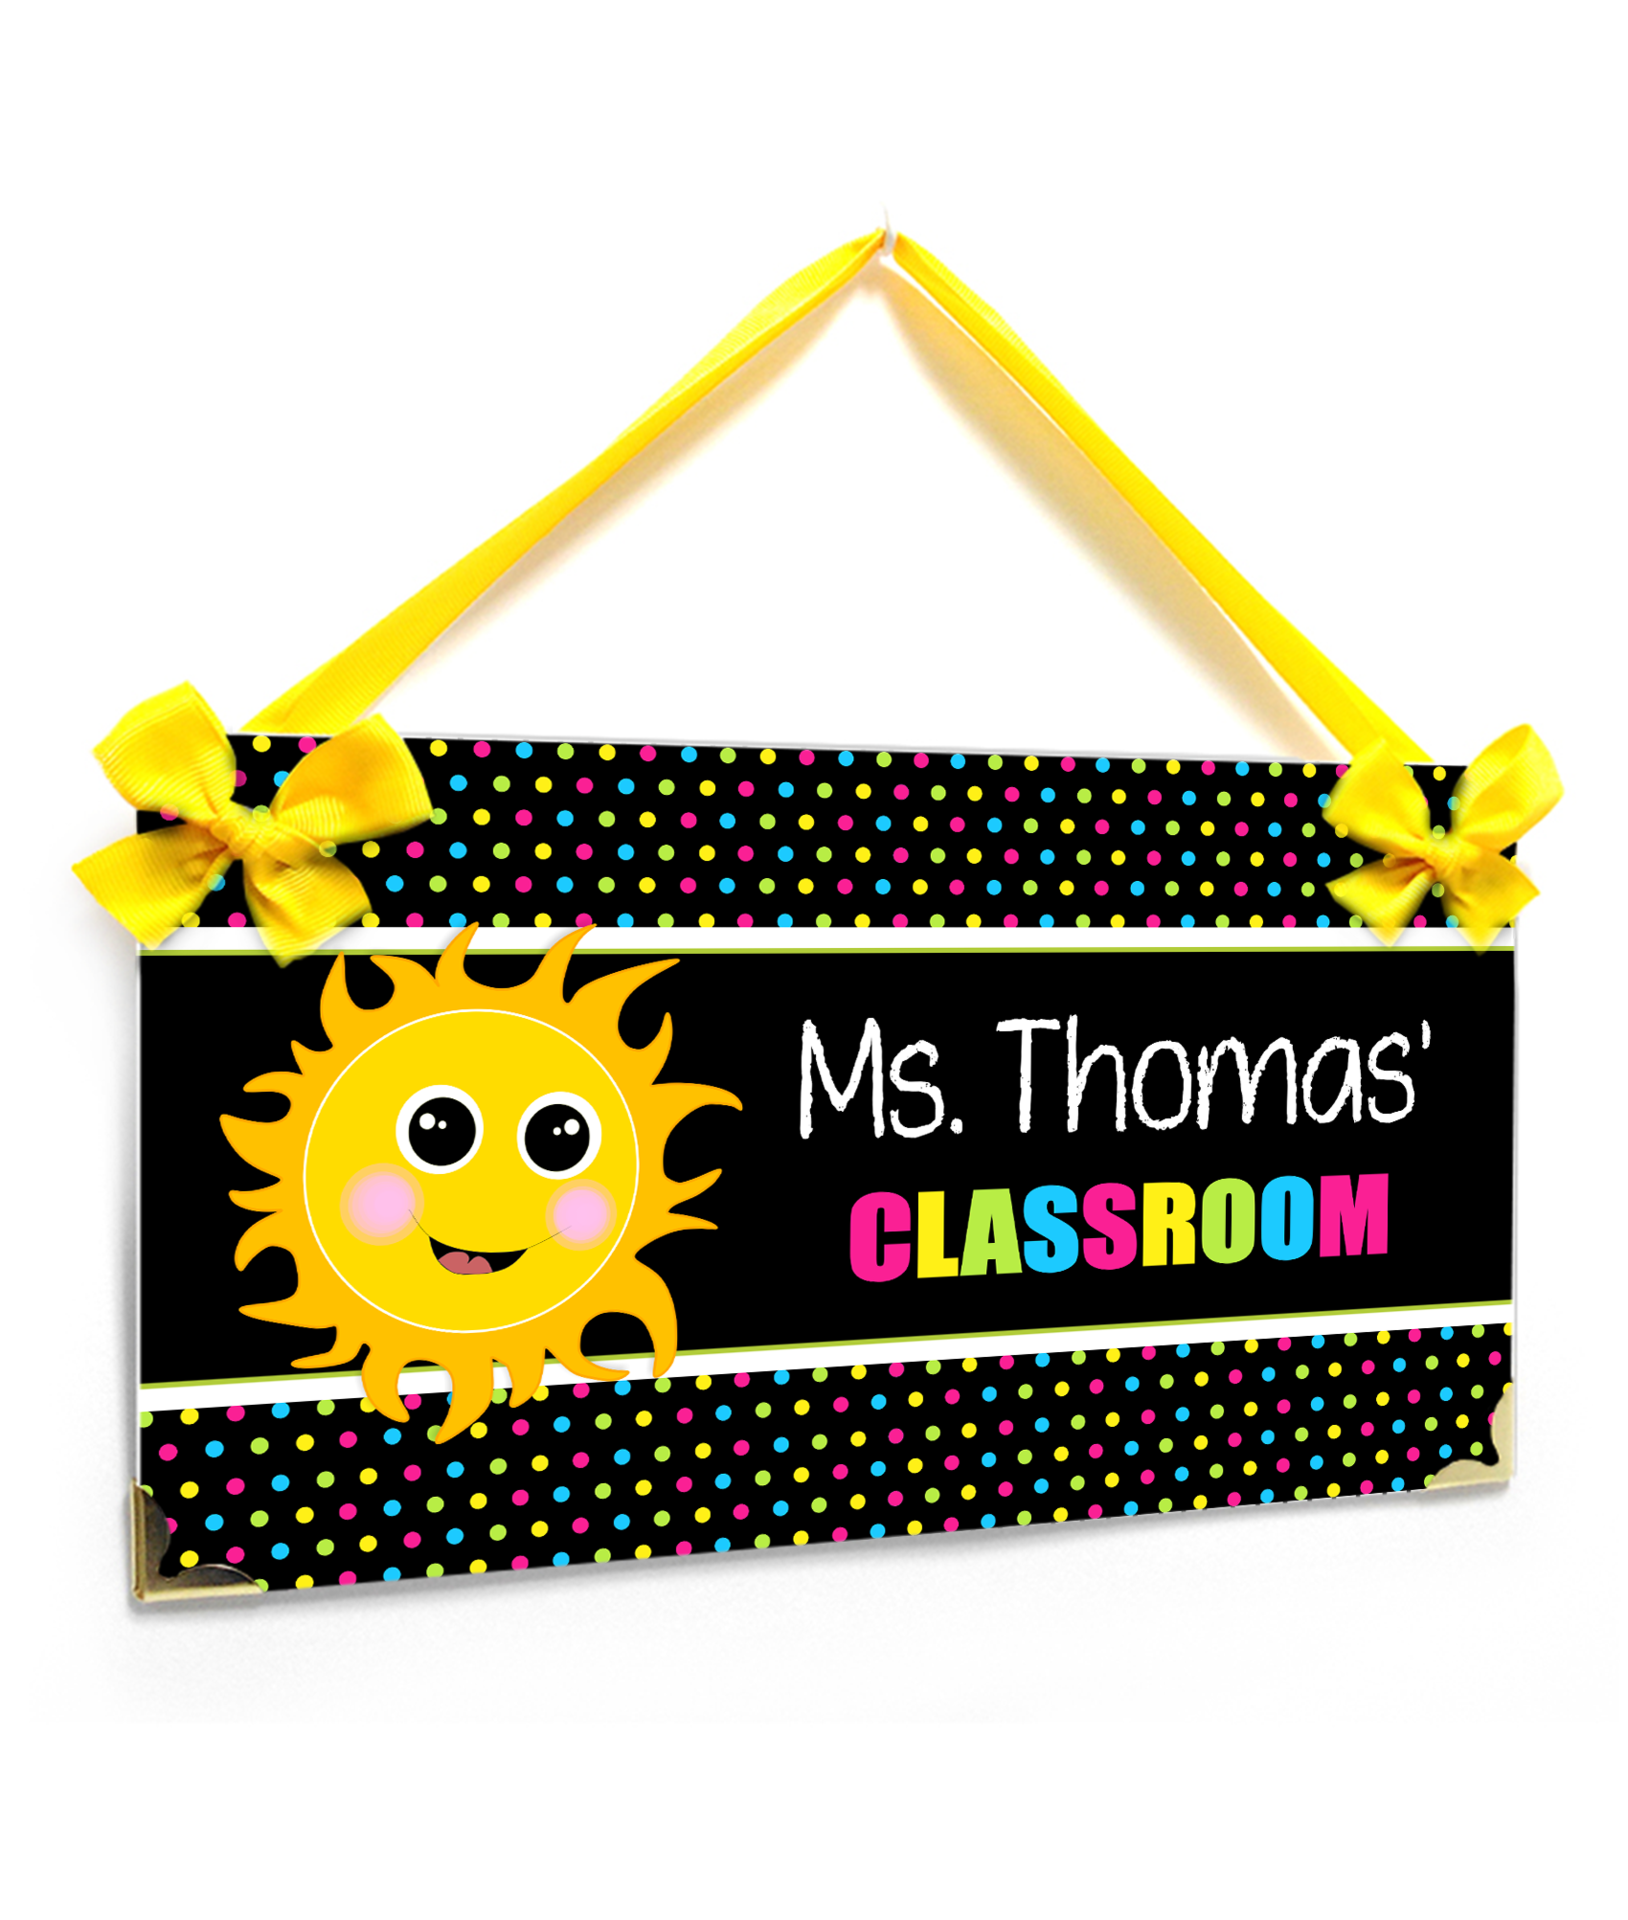 Customized Teacher Name Door Sign Black with a cute yellow sun and